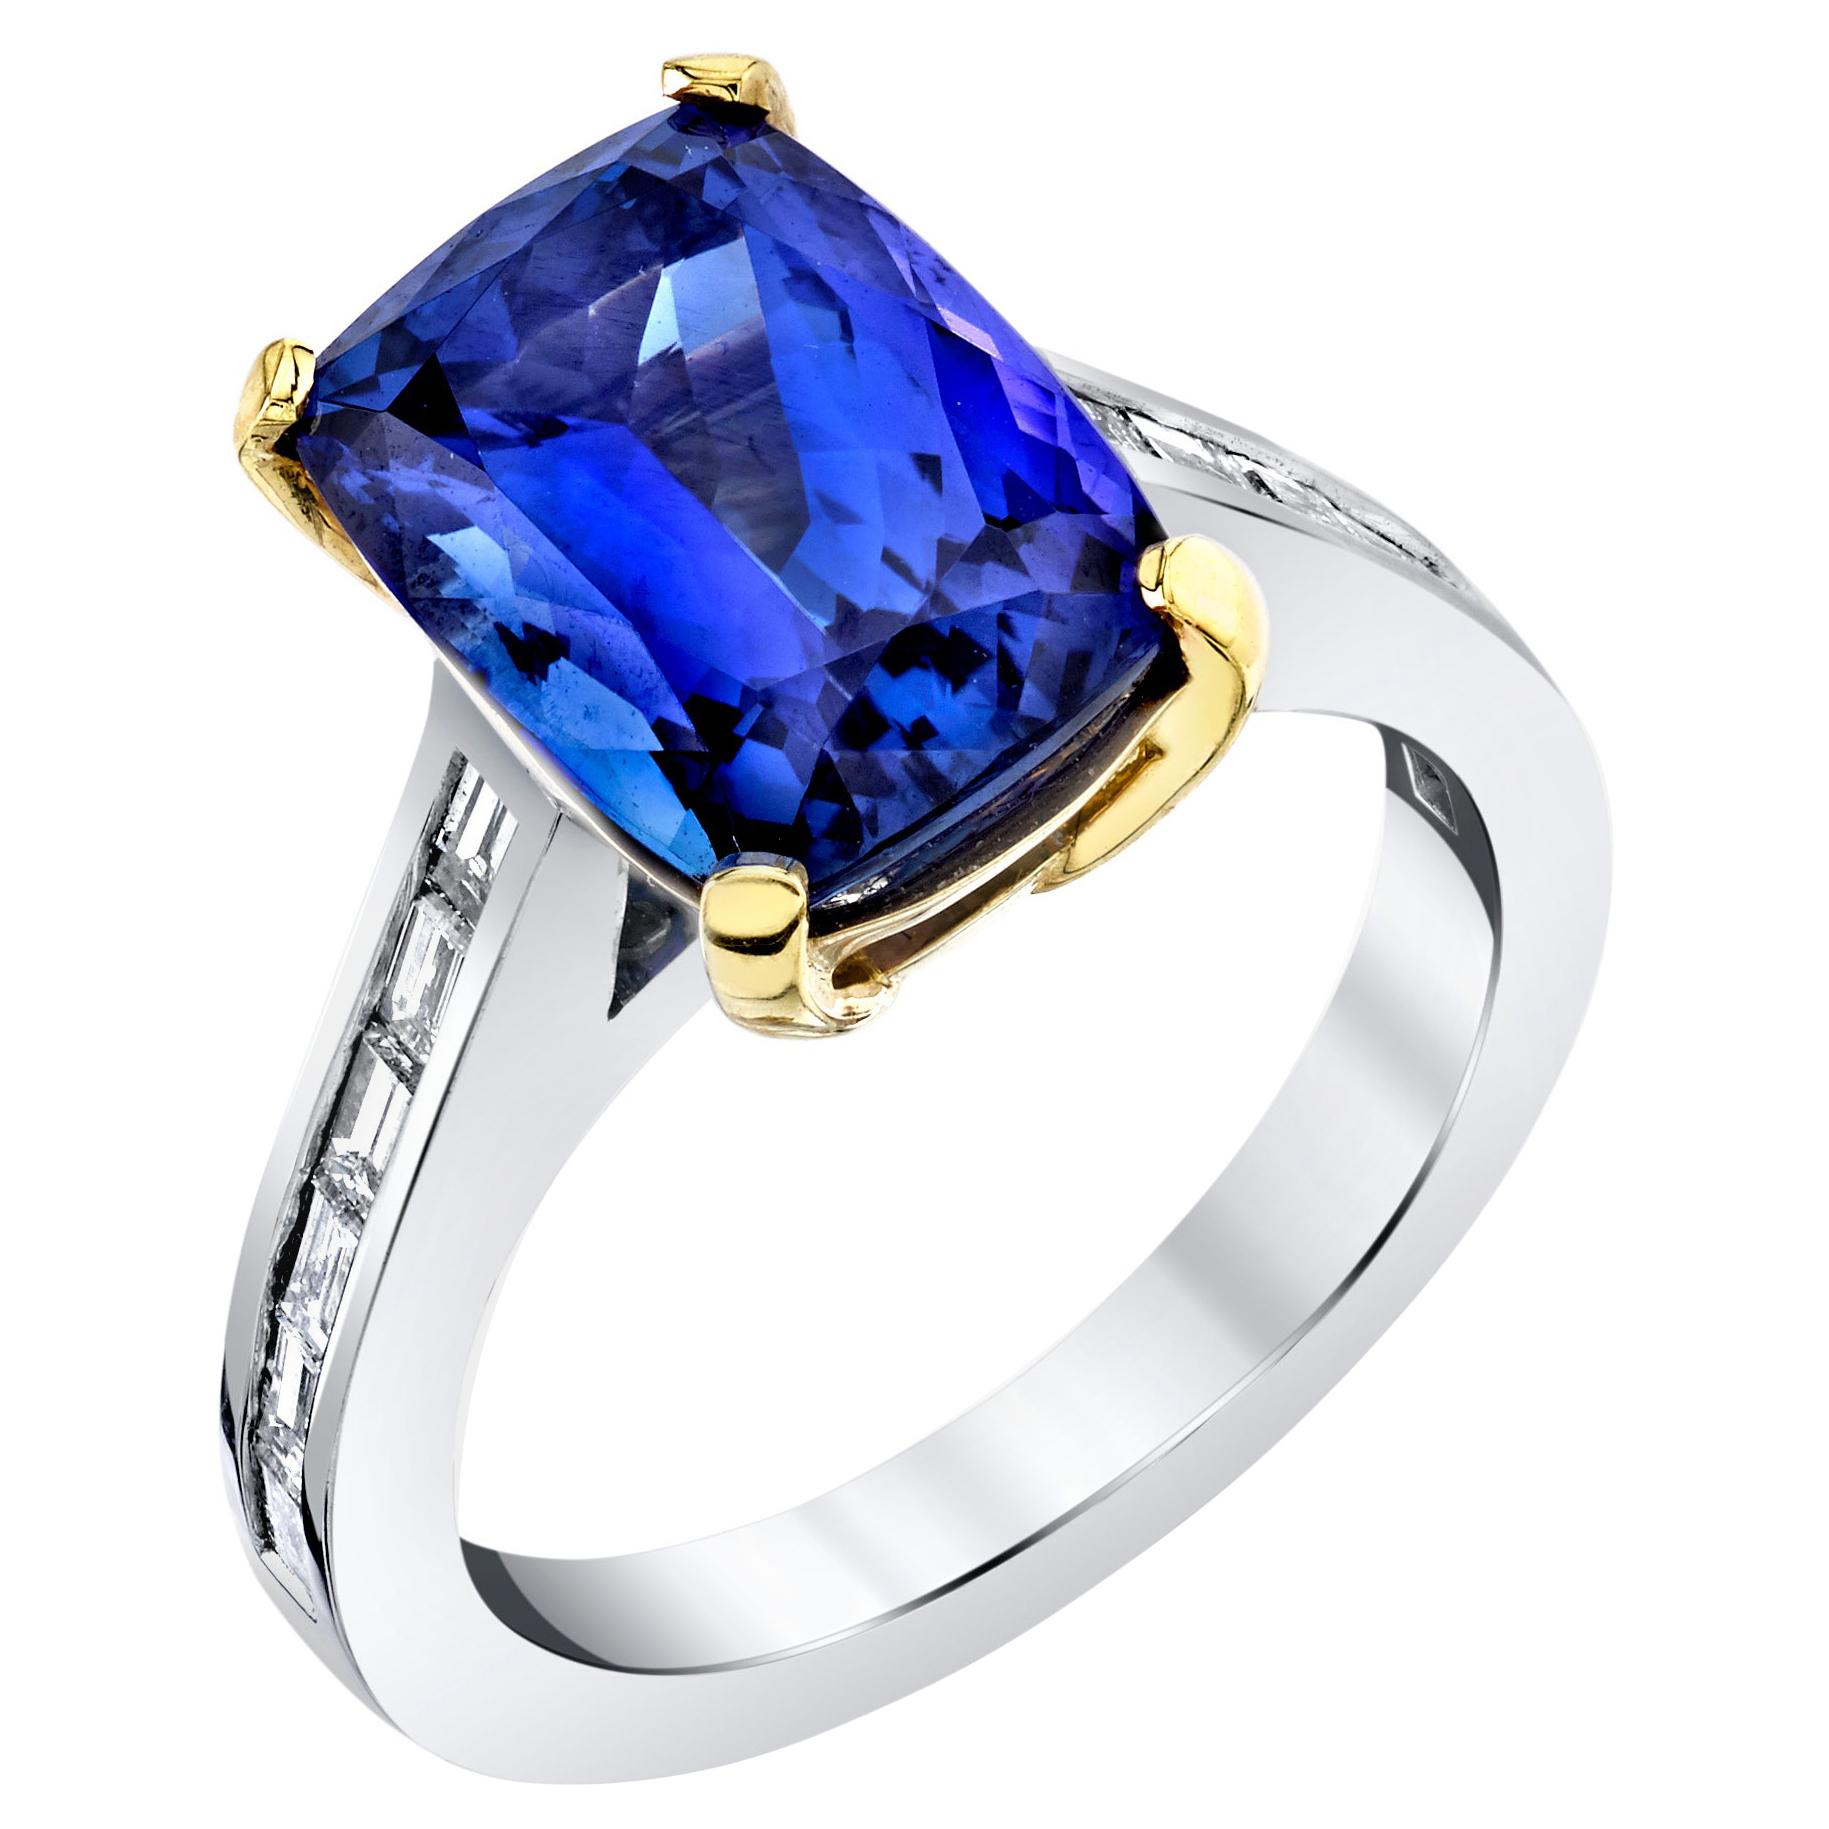 18K Gold Cushion Cut Tanzanite Rings - 146 For Sale on 1stDibs 